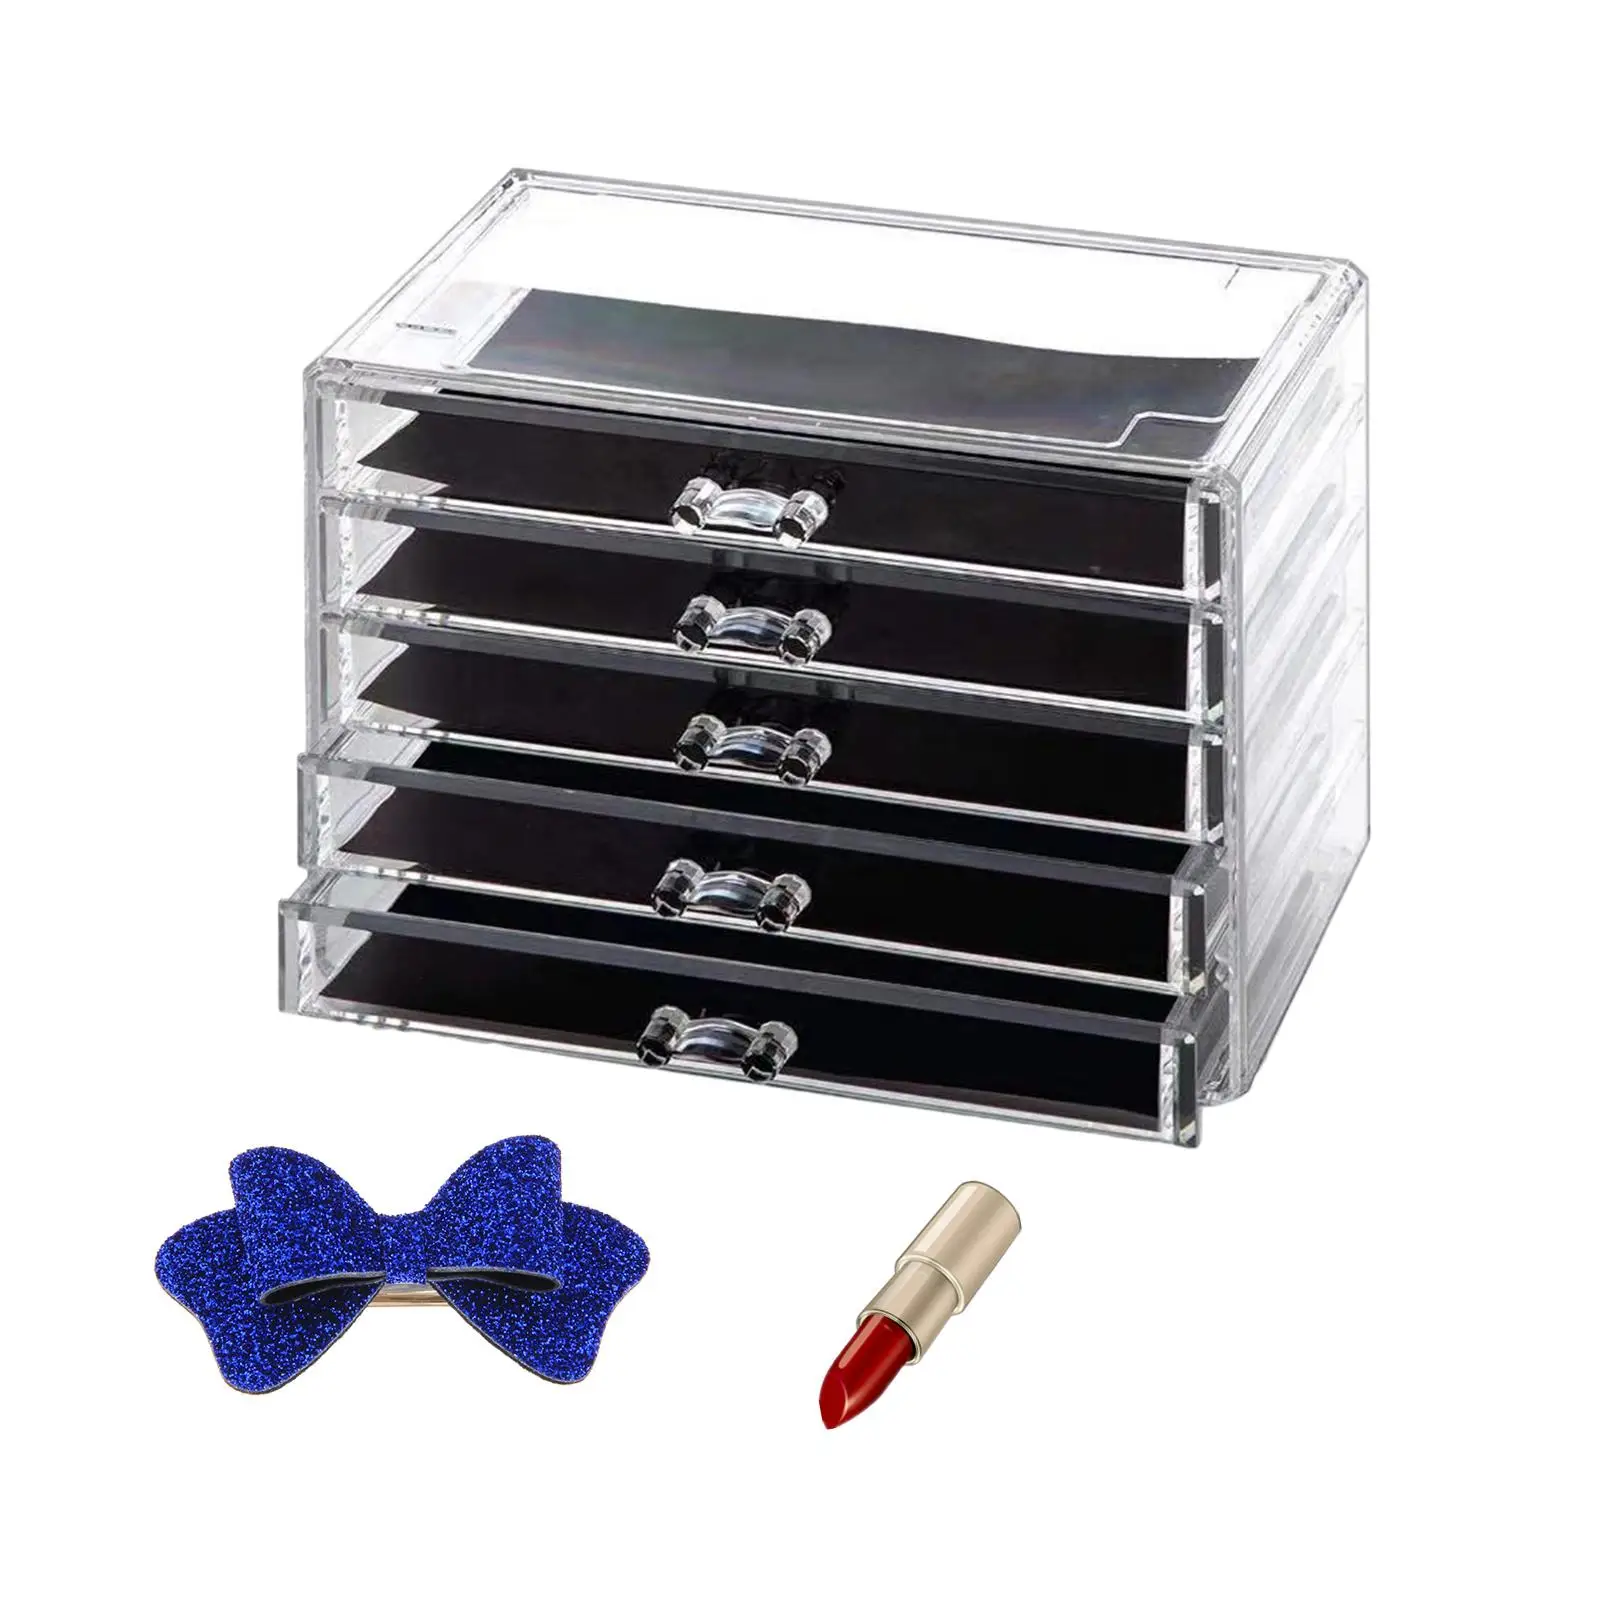  Organizer Skin Care Cosmetic Display Case Storage Box Make up Container with 5 Drawers for Bathroom